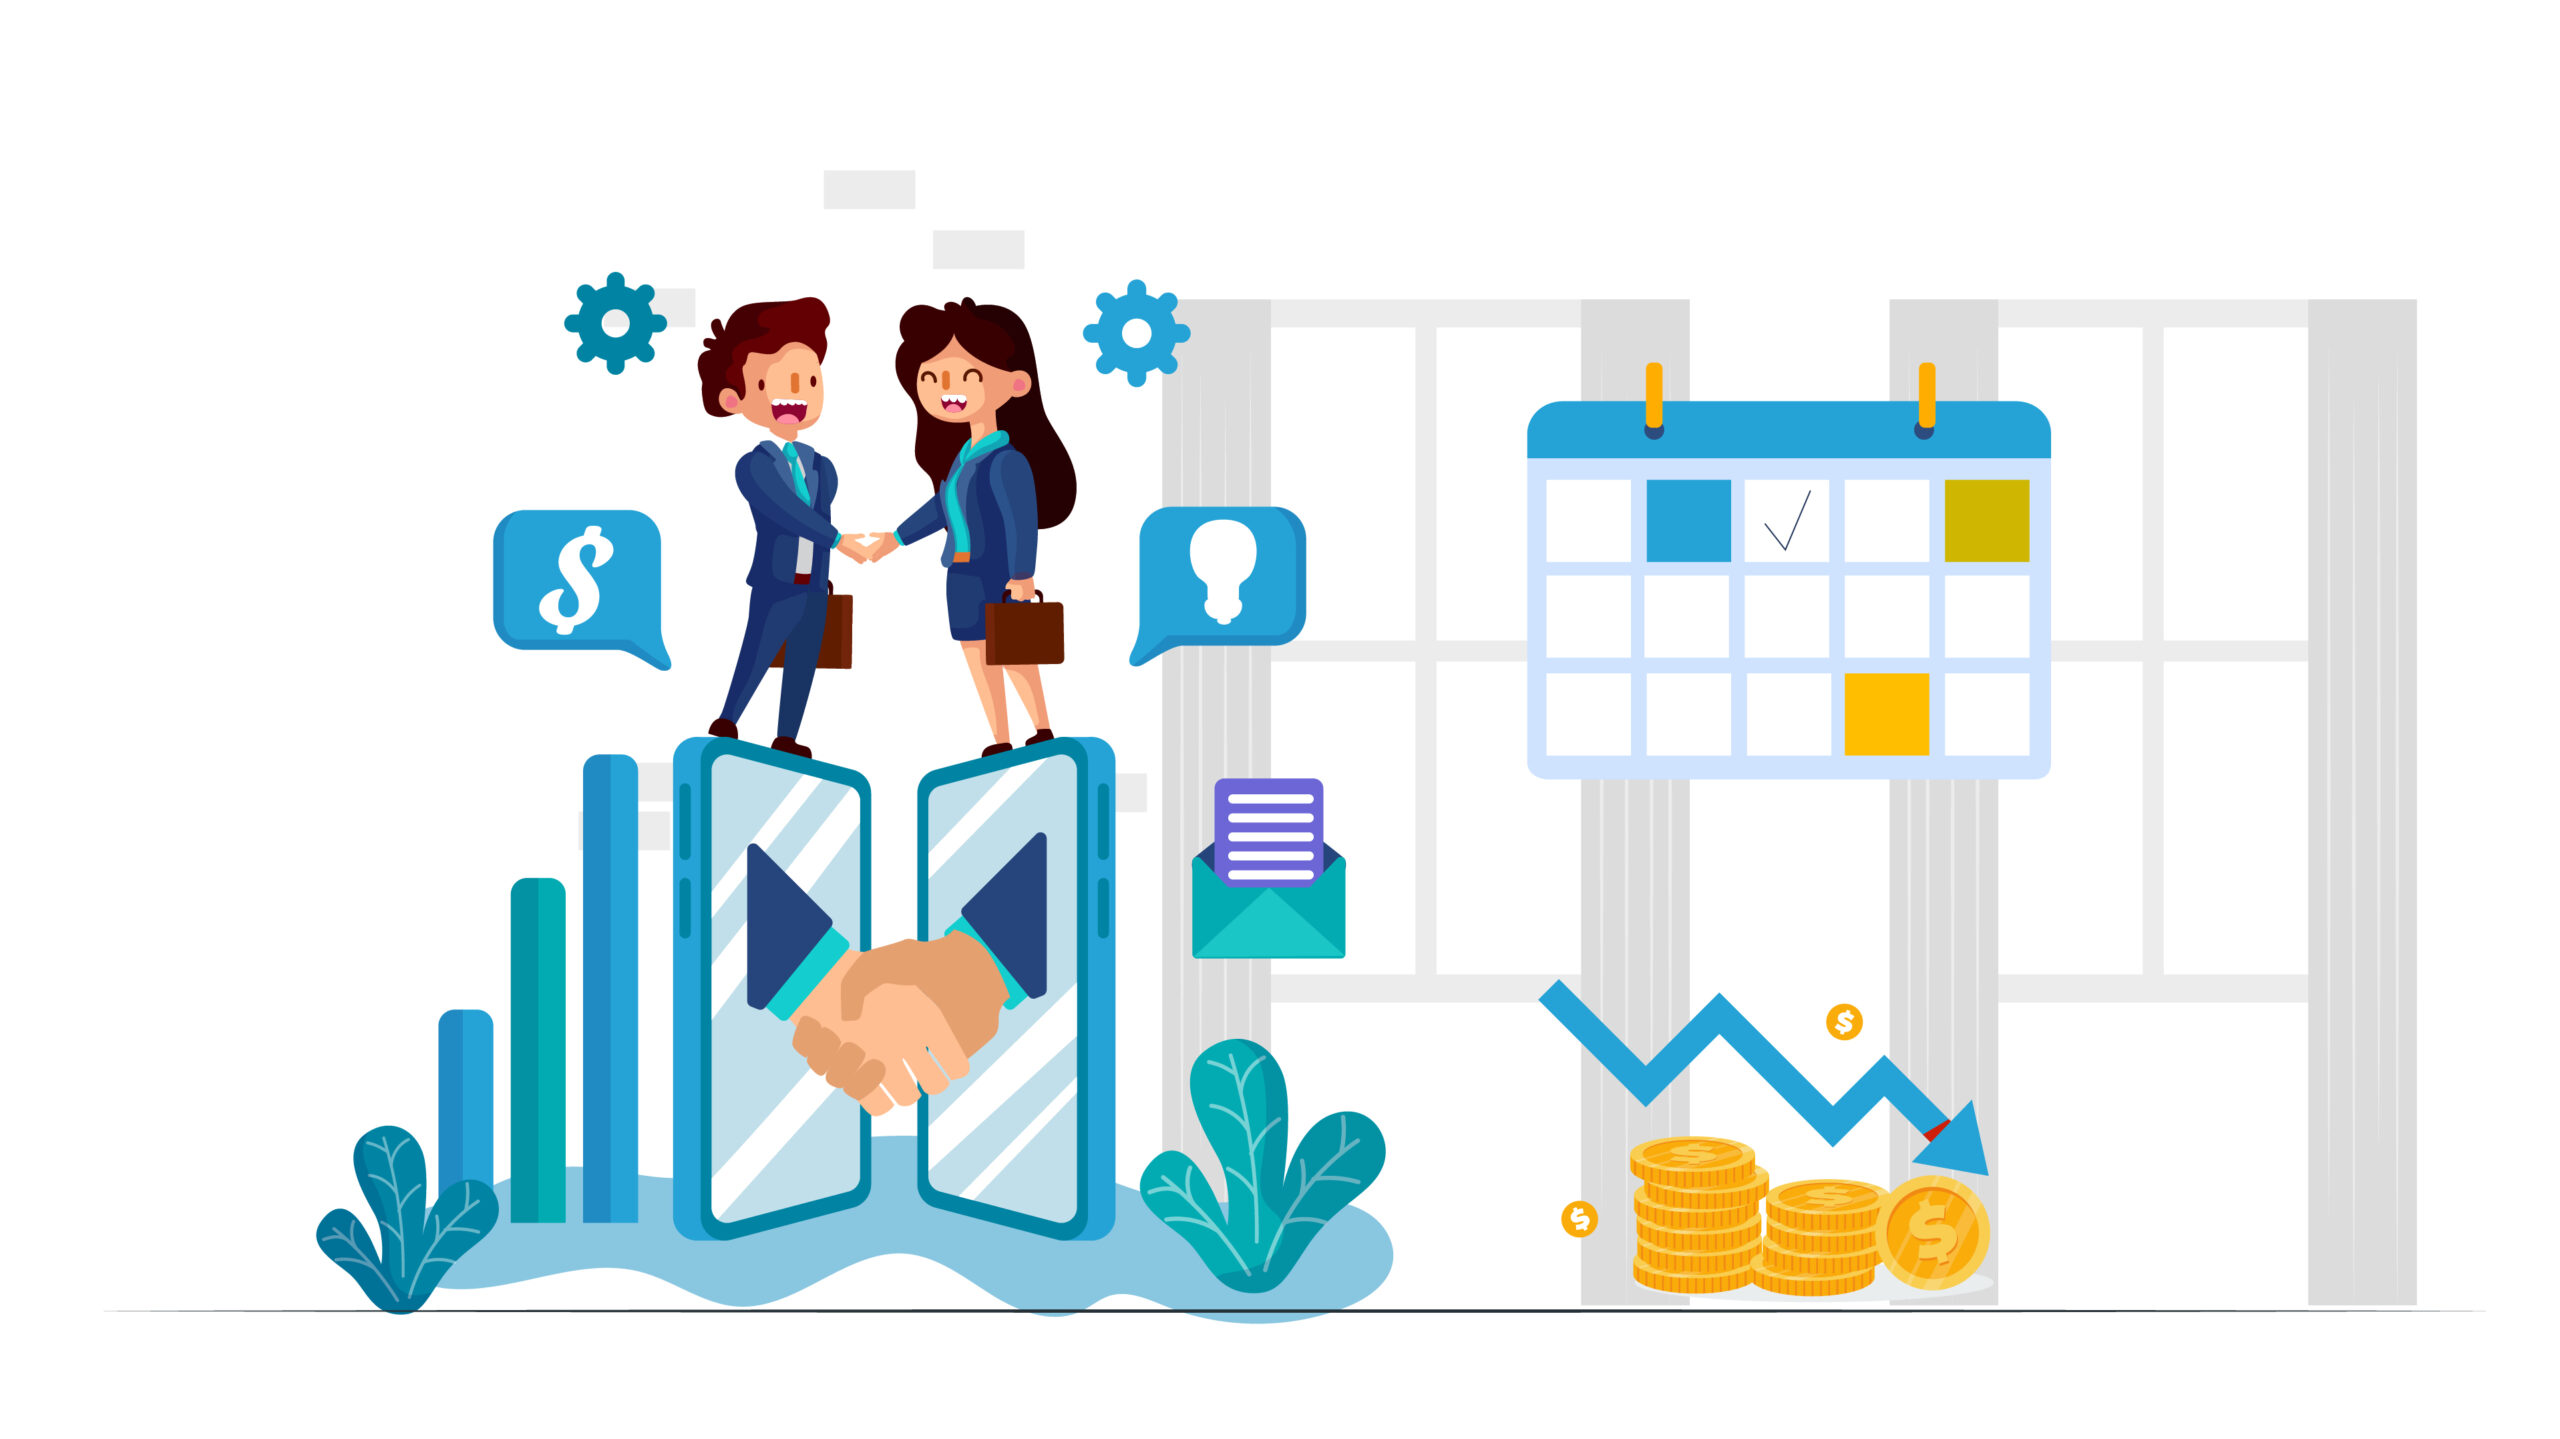 Triple peak day work day trend elements, showing a calendar, employee illustrations, and related work elements